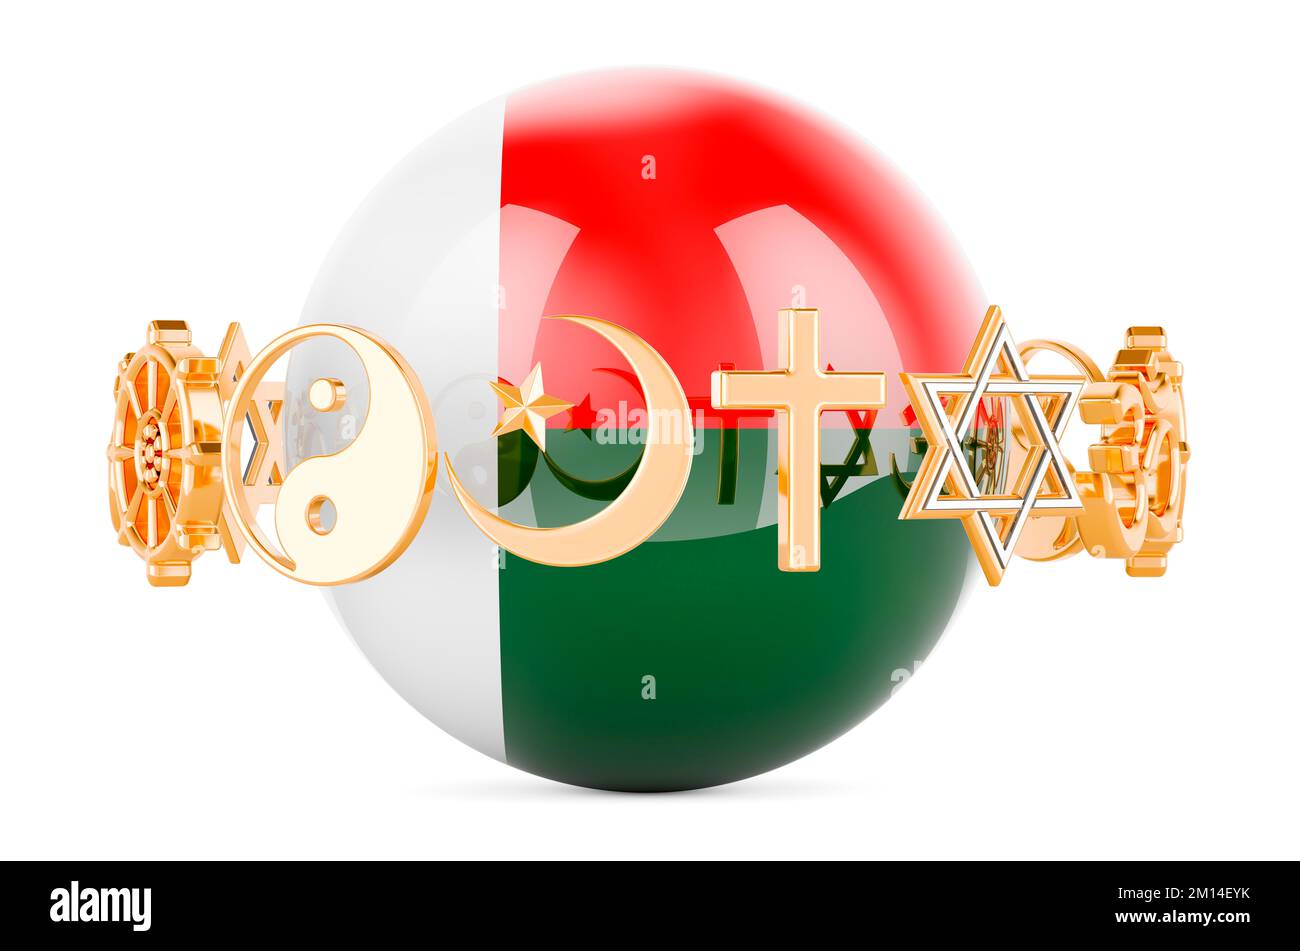 Madagascar flag painted on sphere with religions symbols around, 3D rendering isolated on white background Stock Photo